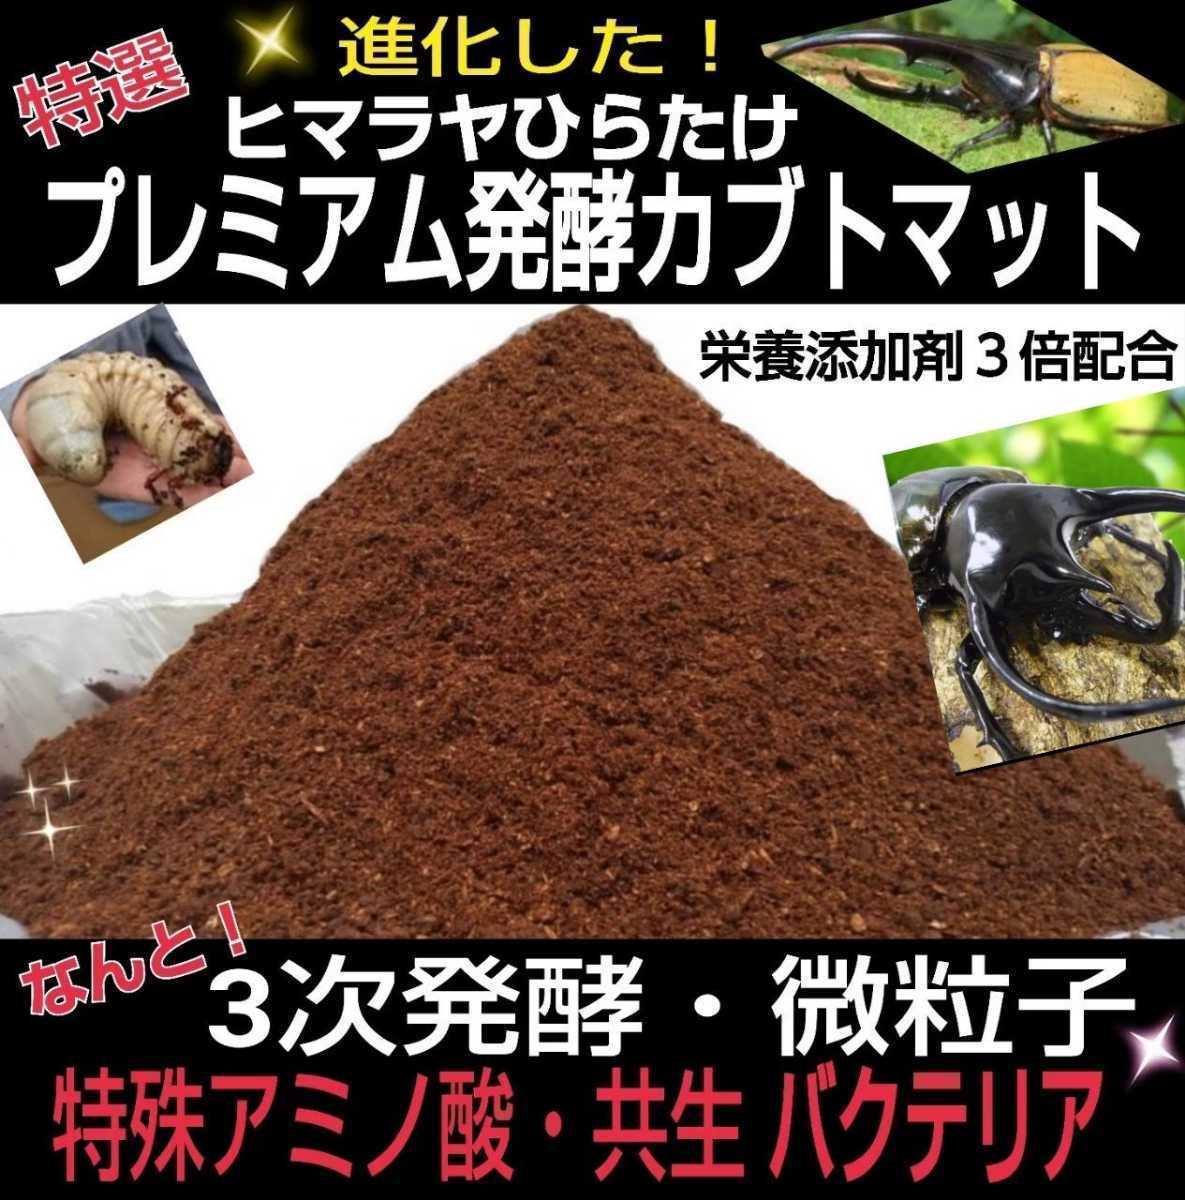  finest quality! premium 3 next departure . rhinoceros beetle mat [5 sack ]tore Hello s* chitosan * symbiosis bacteria 3 times combination production egg also eminent. . insect ... not 